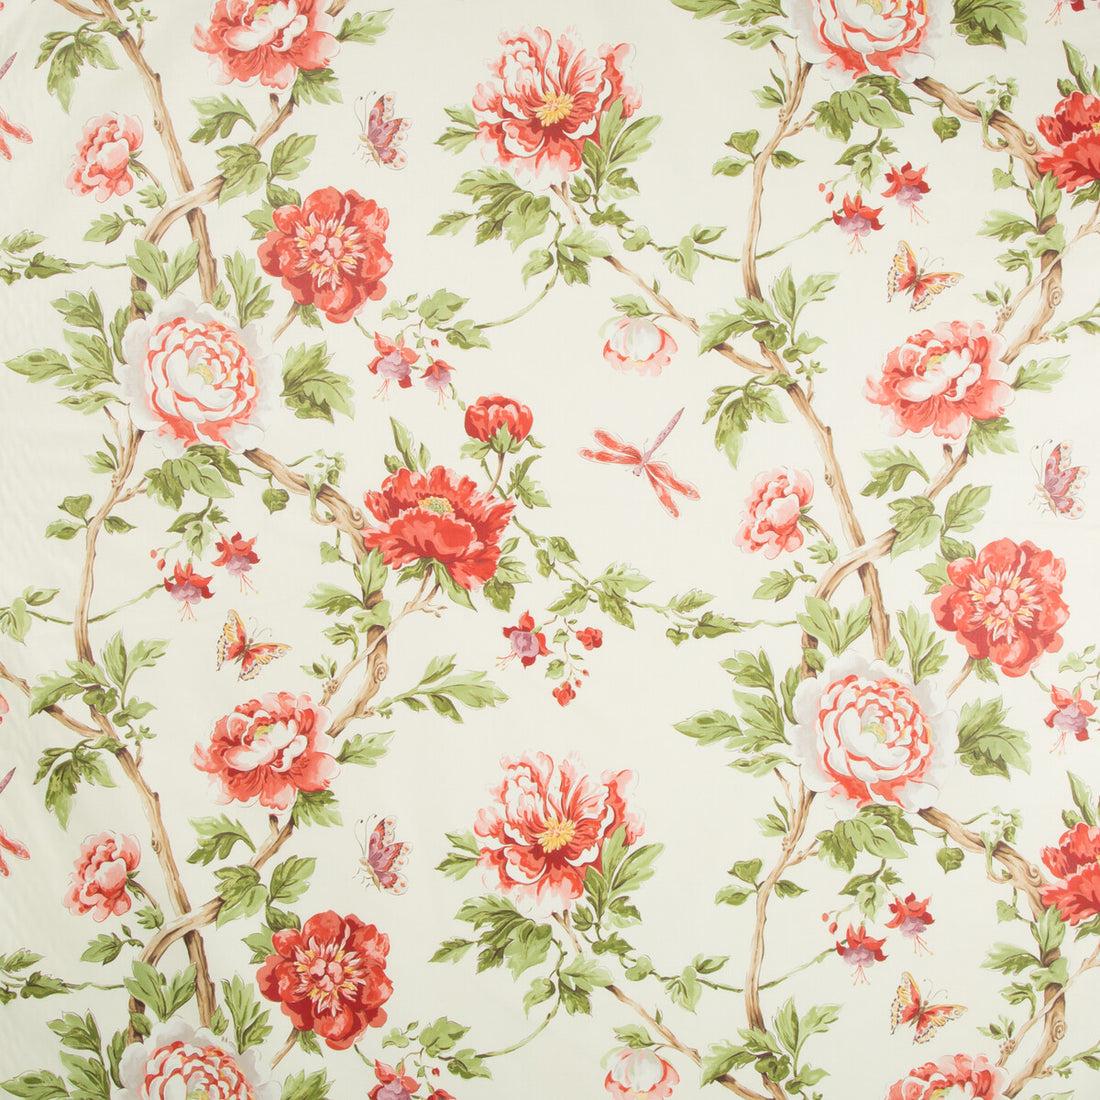 Les Pivoines Print fabric in red color - pattern 8017135.9.0 - by Brunschwig &amp; Fils in the Les Ensembliers collection